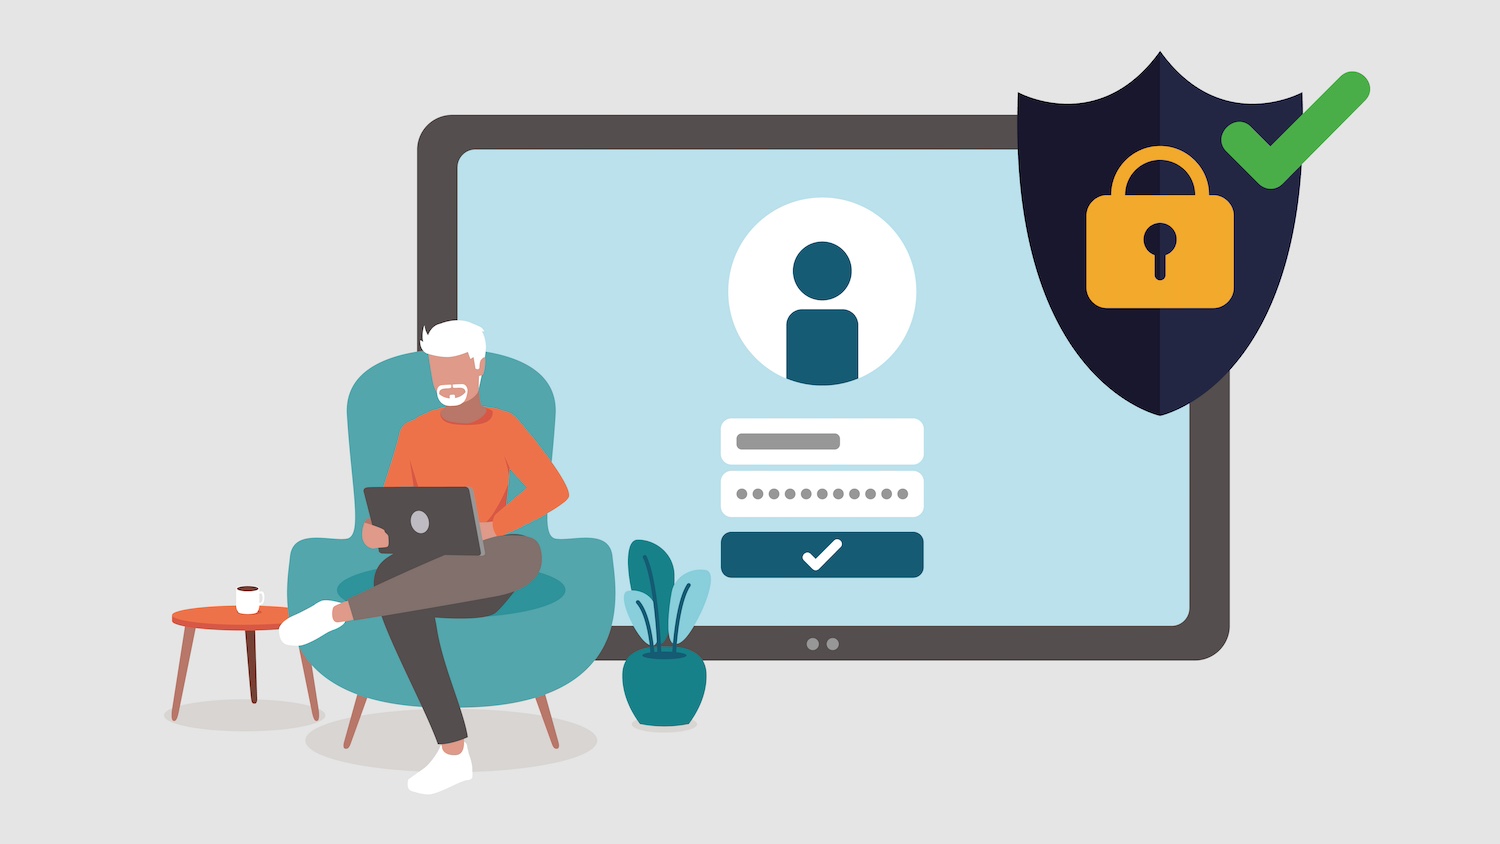 Illustration of a man sitting in a chair with his laptop behind him is an illustration of a secure login screen